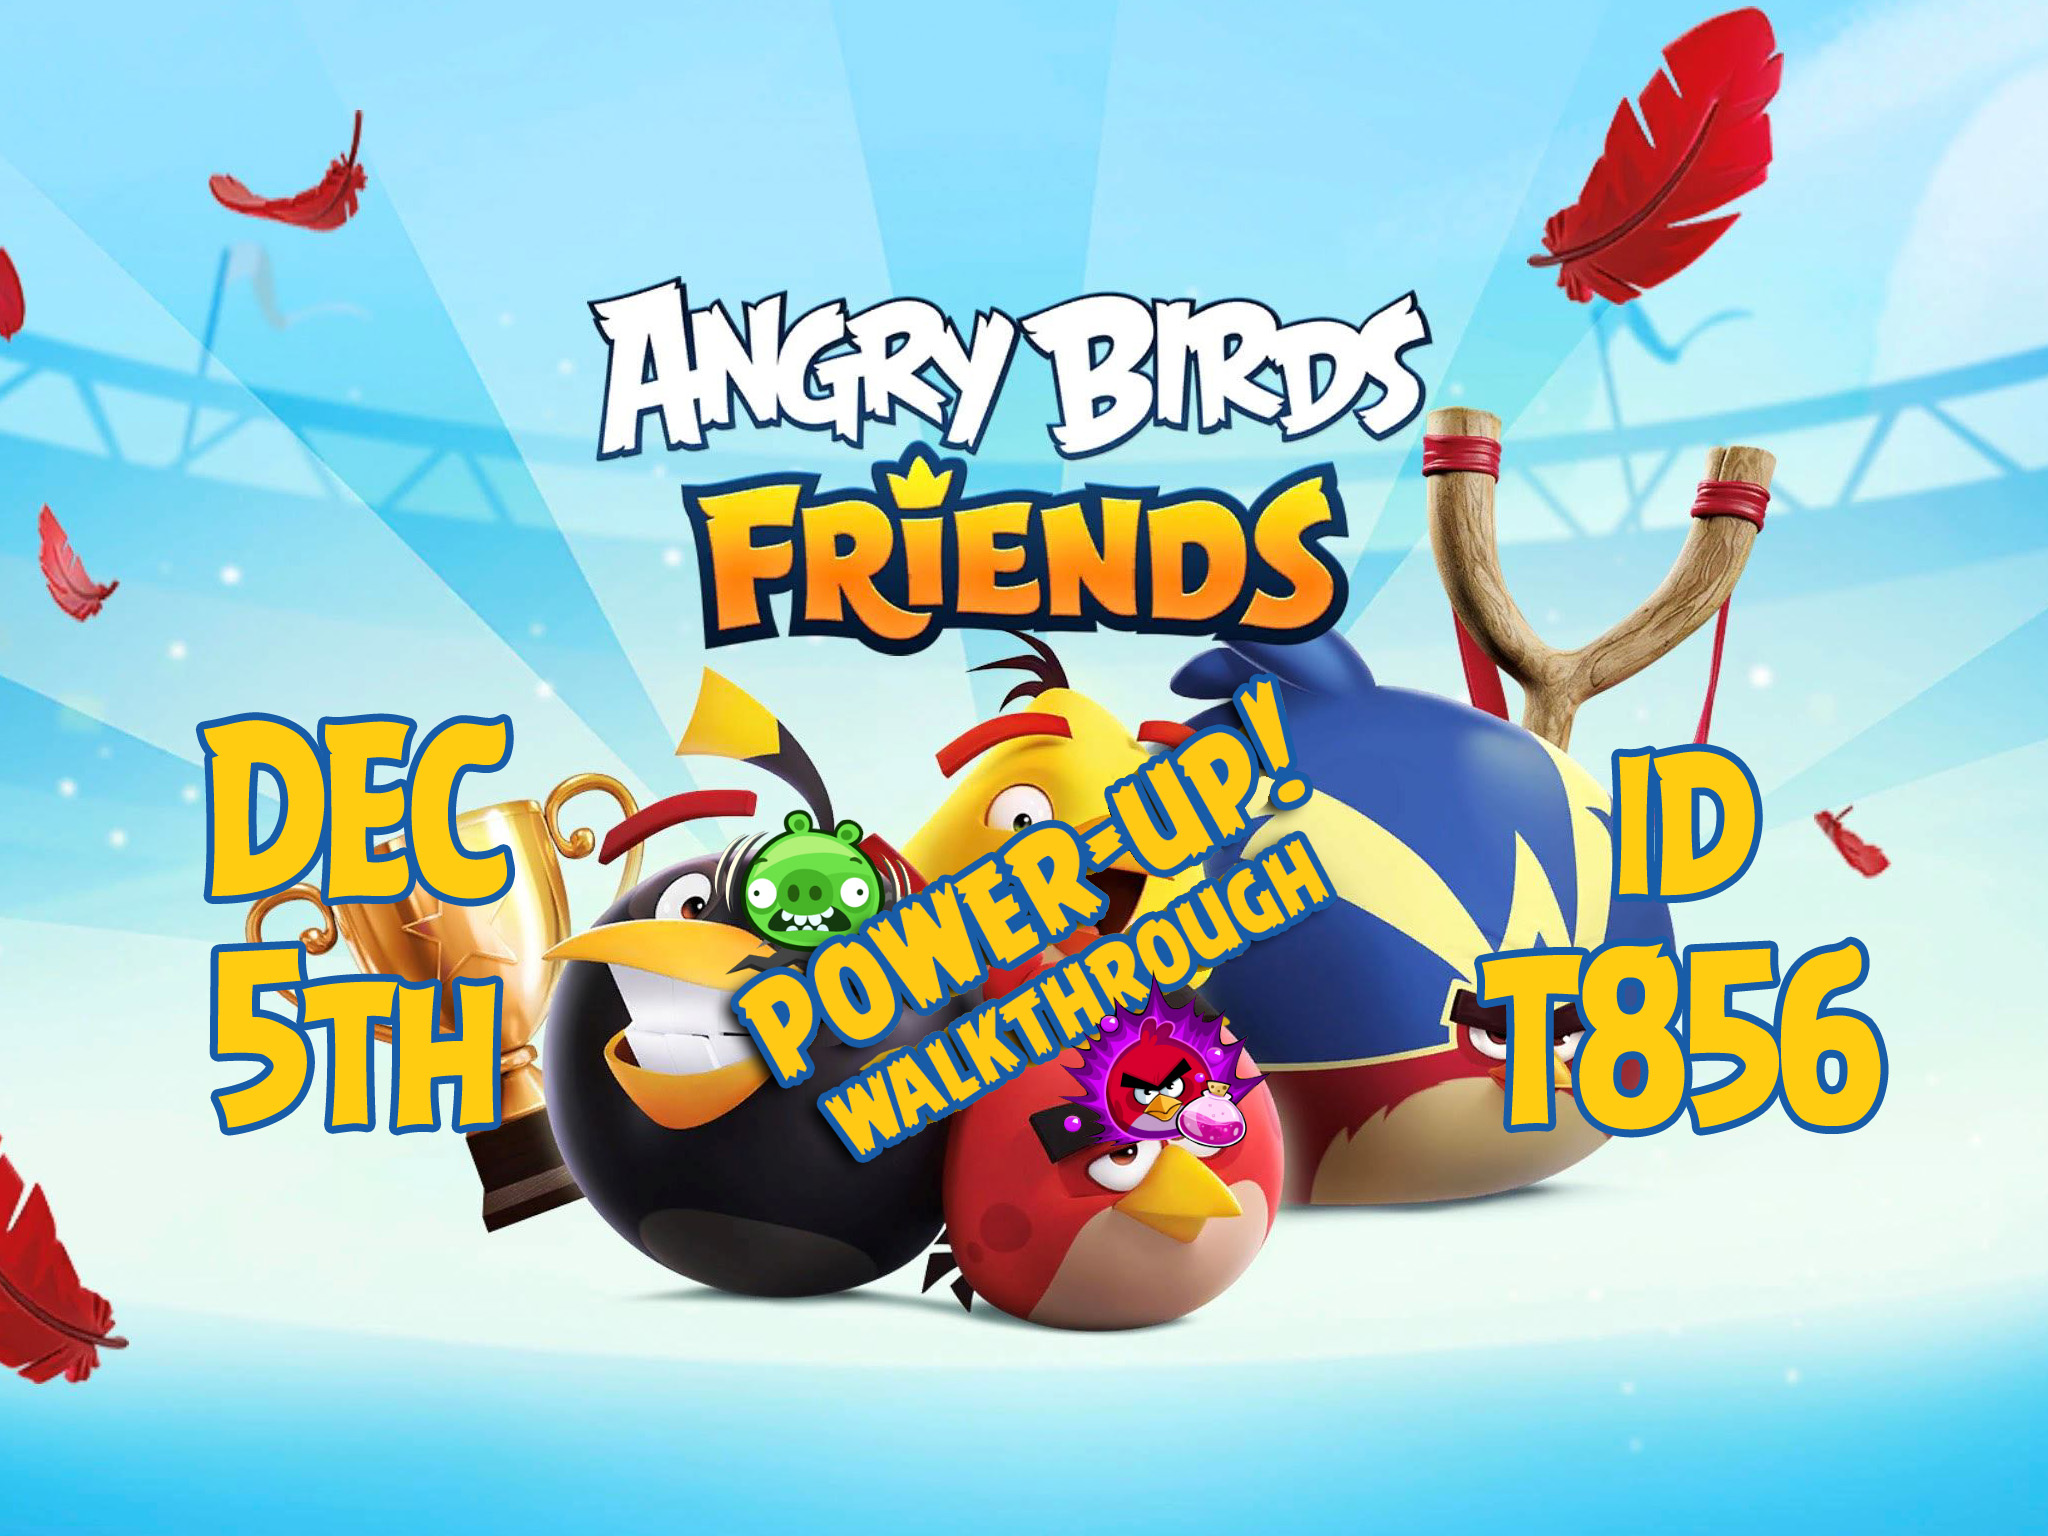 Angry-Birds-Friends-Tournament-T856-Feature-Image-PU